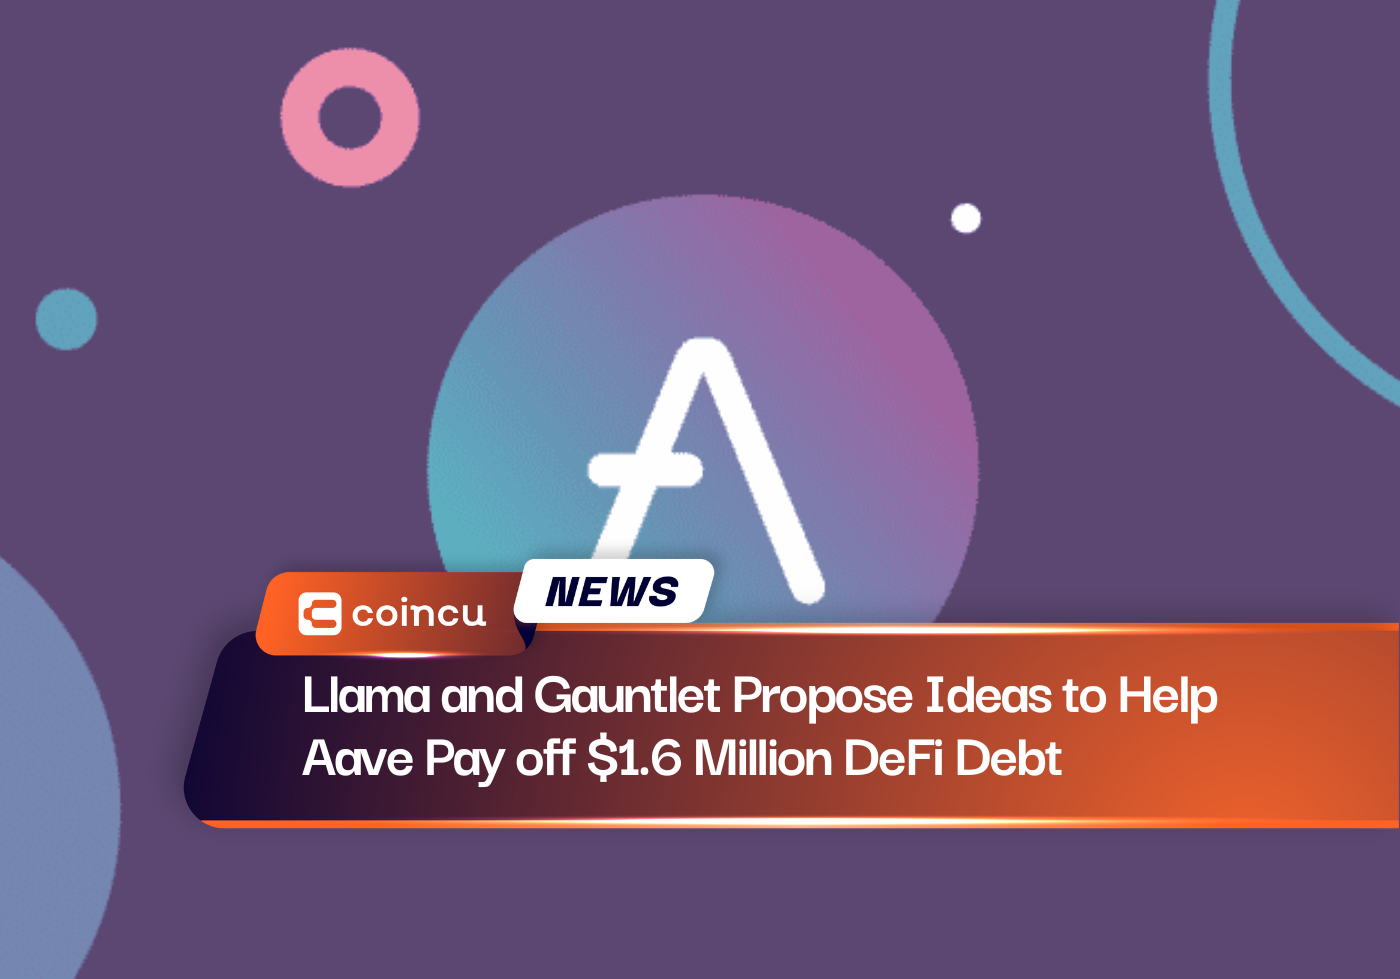 Llama and Gauntlet Propose Ideas to Help Aave Pay off $1.6 Million DeFi Debt